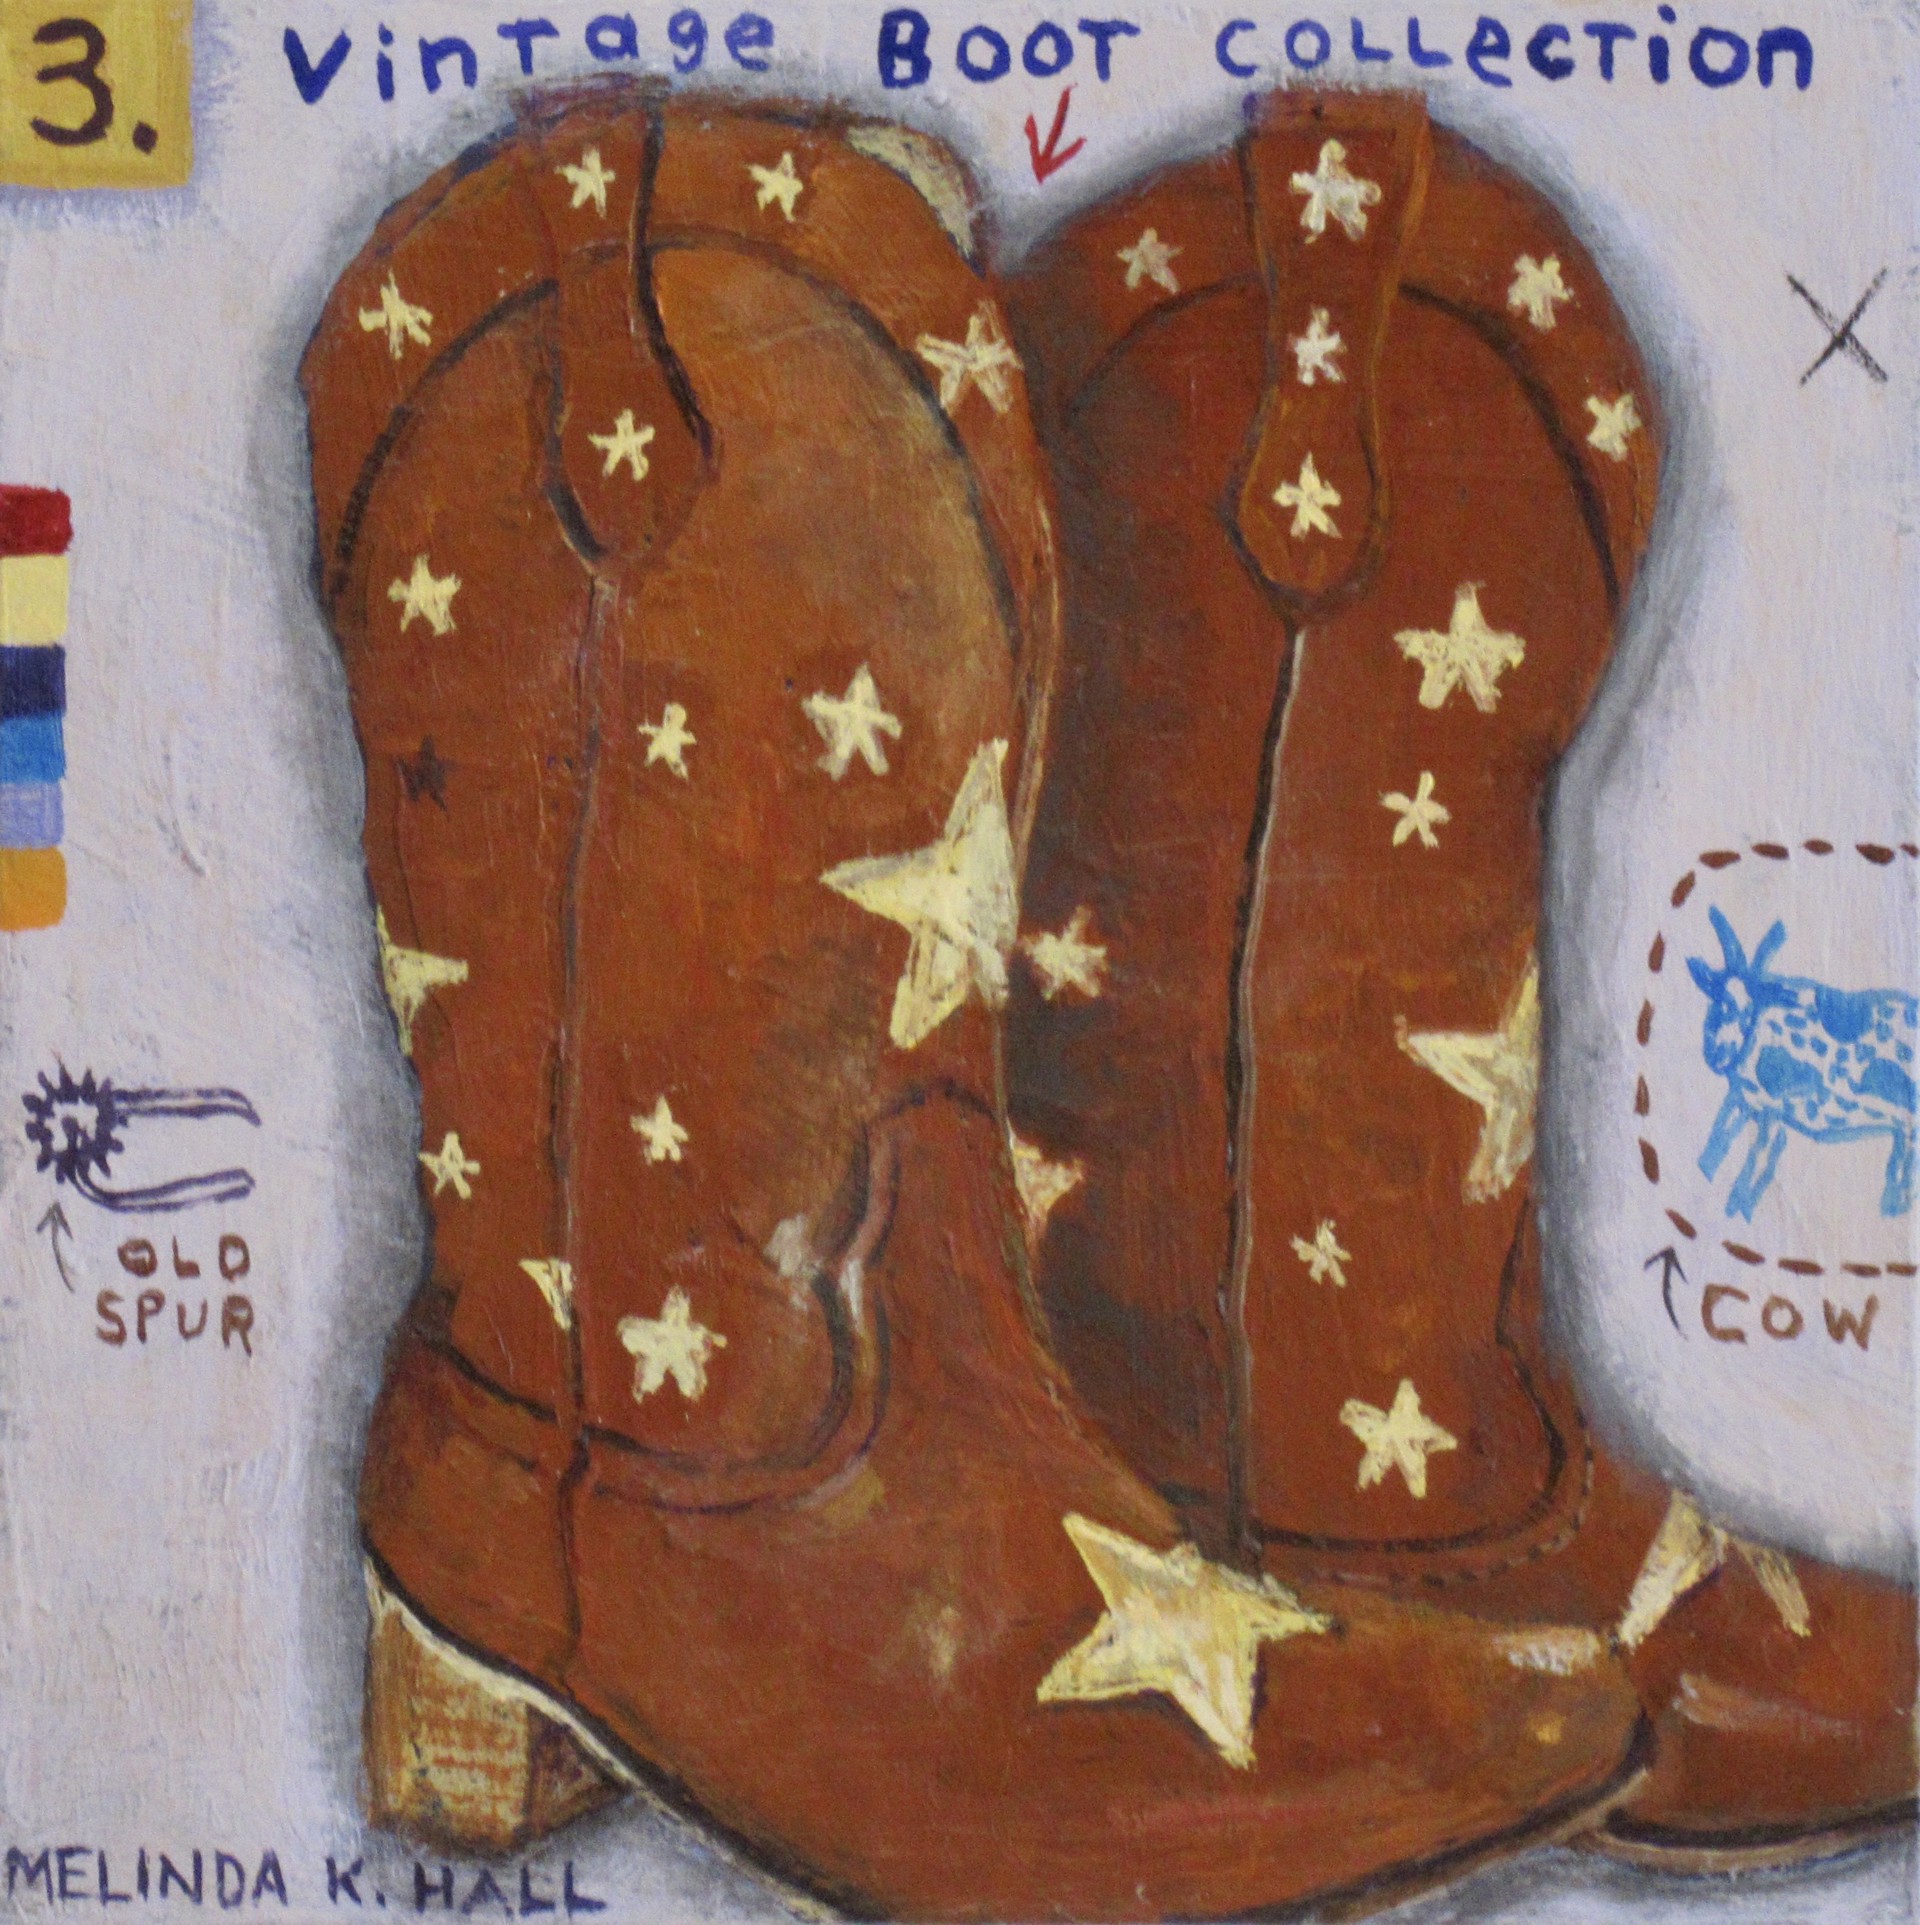 Vintage Boot Collection #3 by Melinda K. Hall